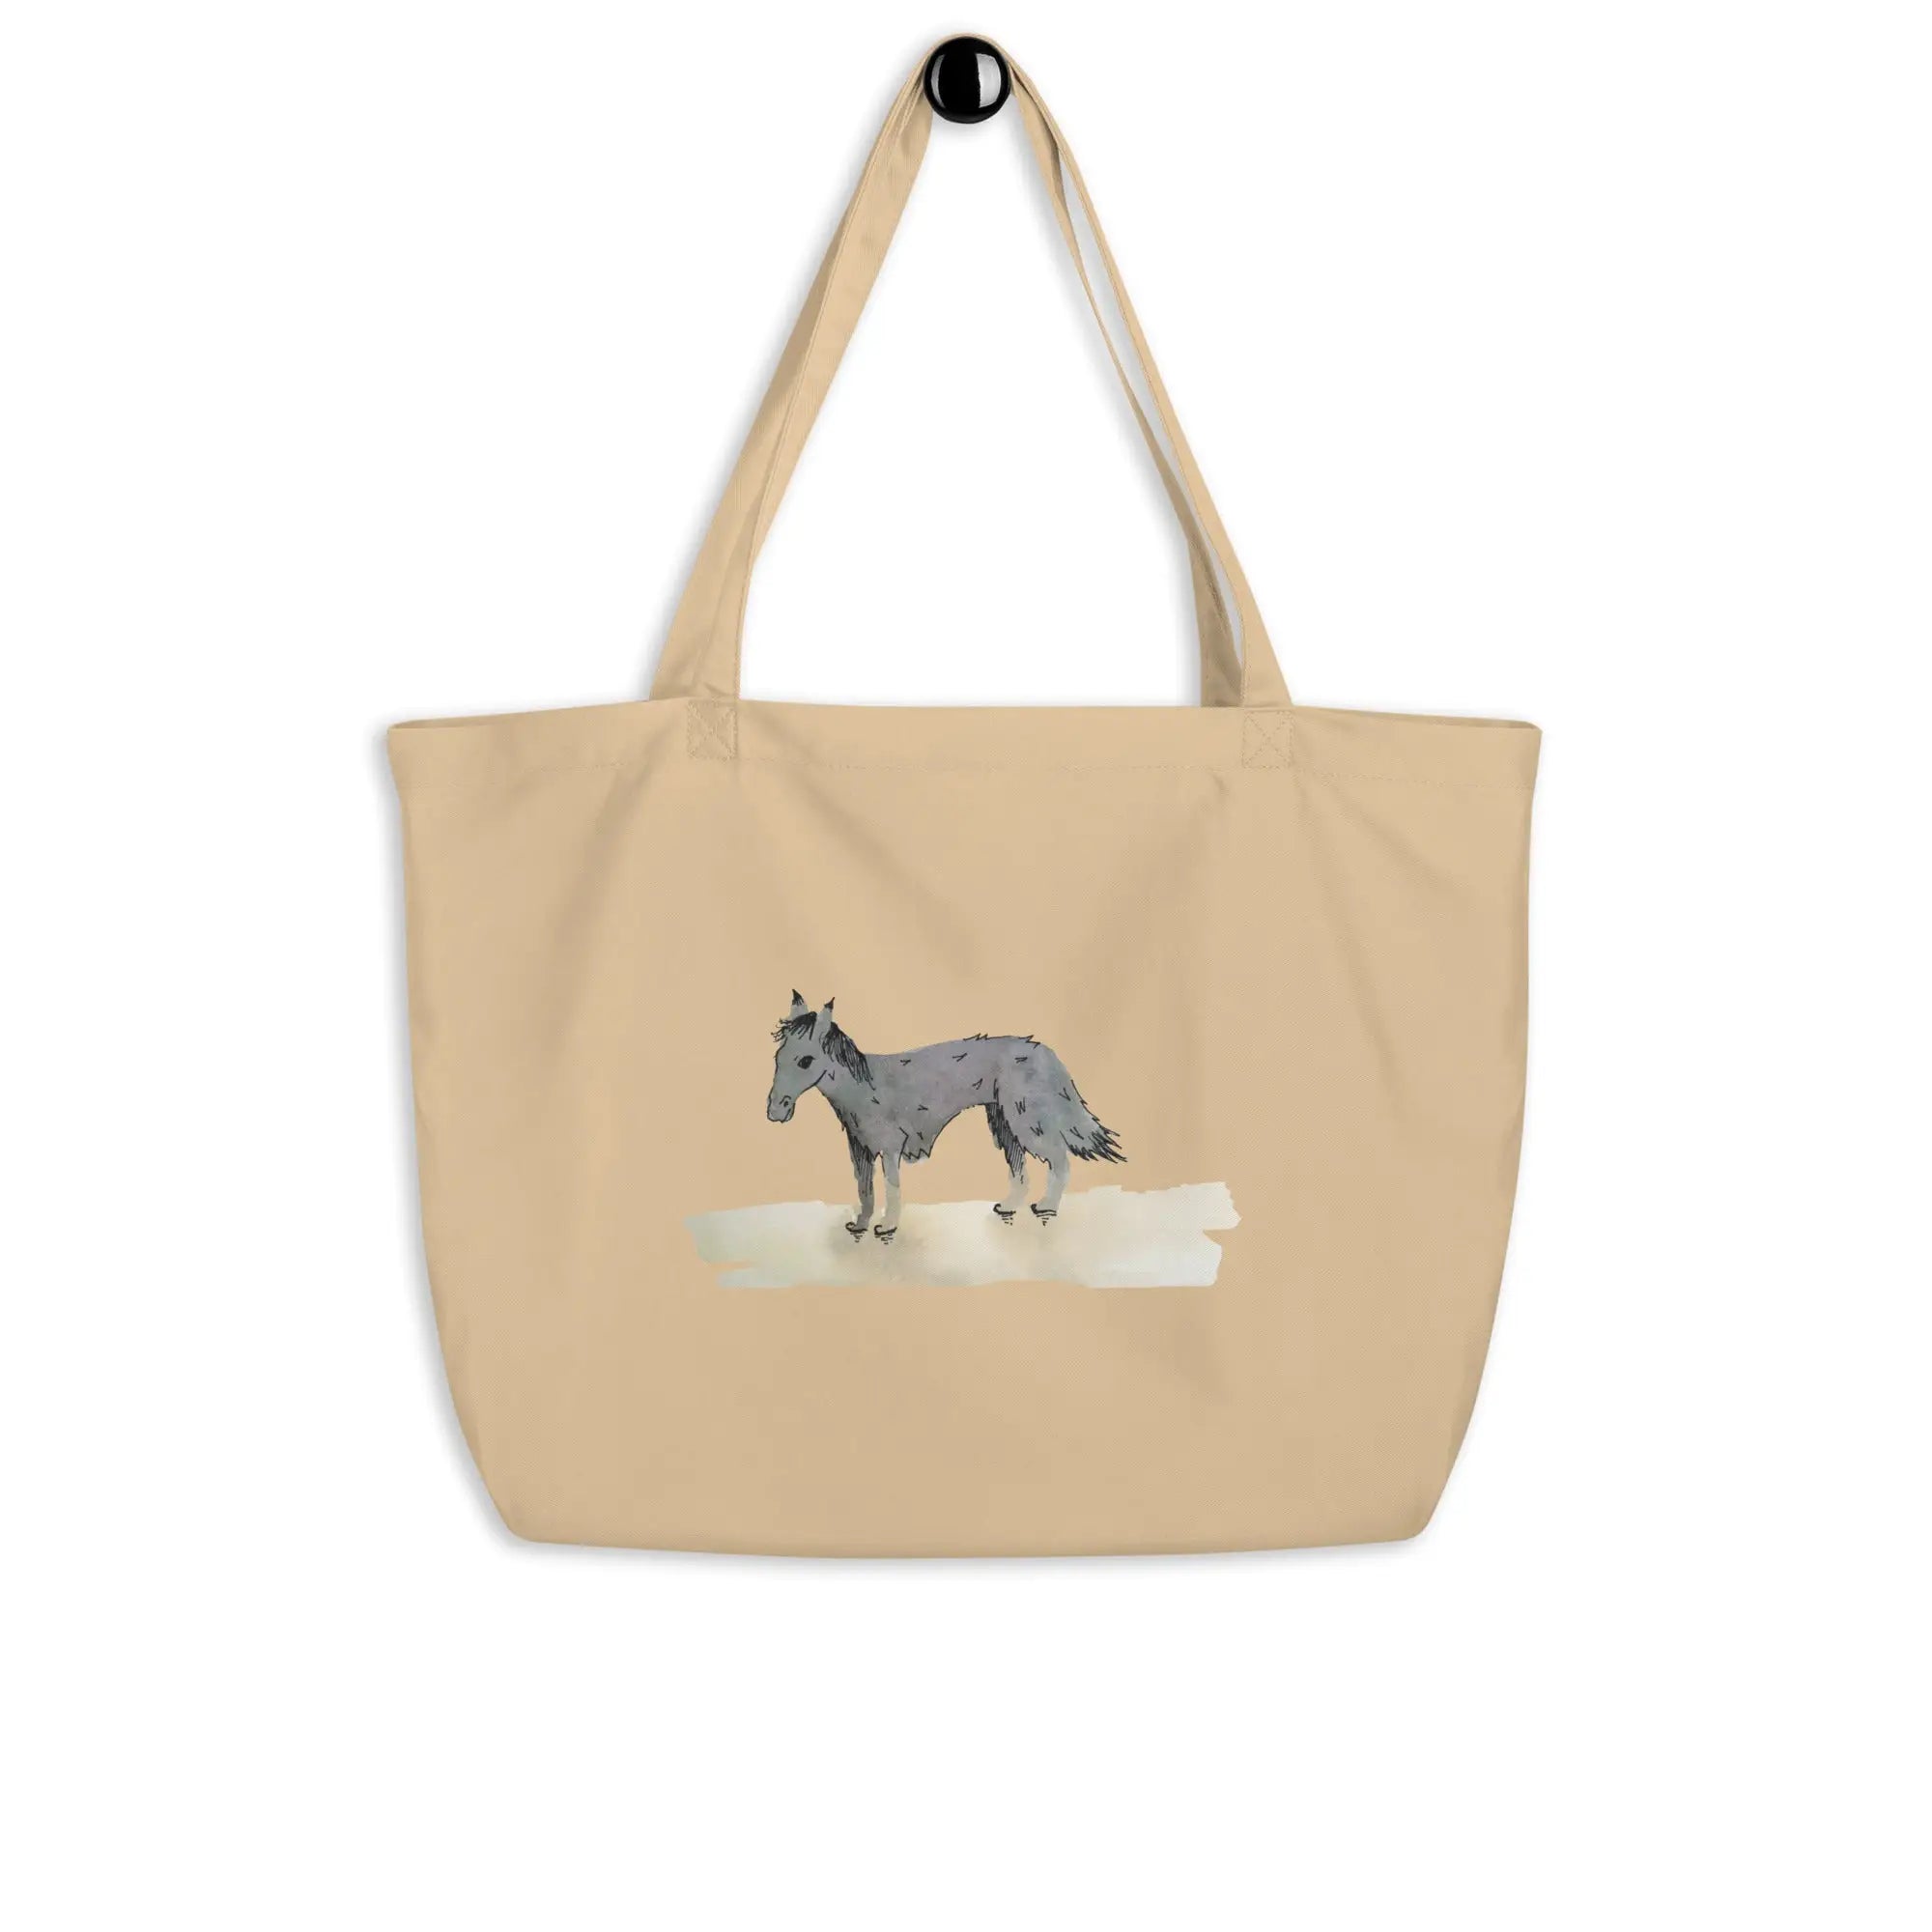 Organic cotton tote bag featuring horse running on beach by Donkeydog